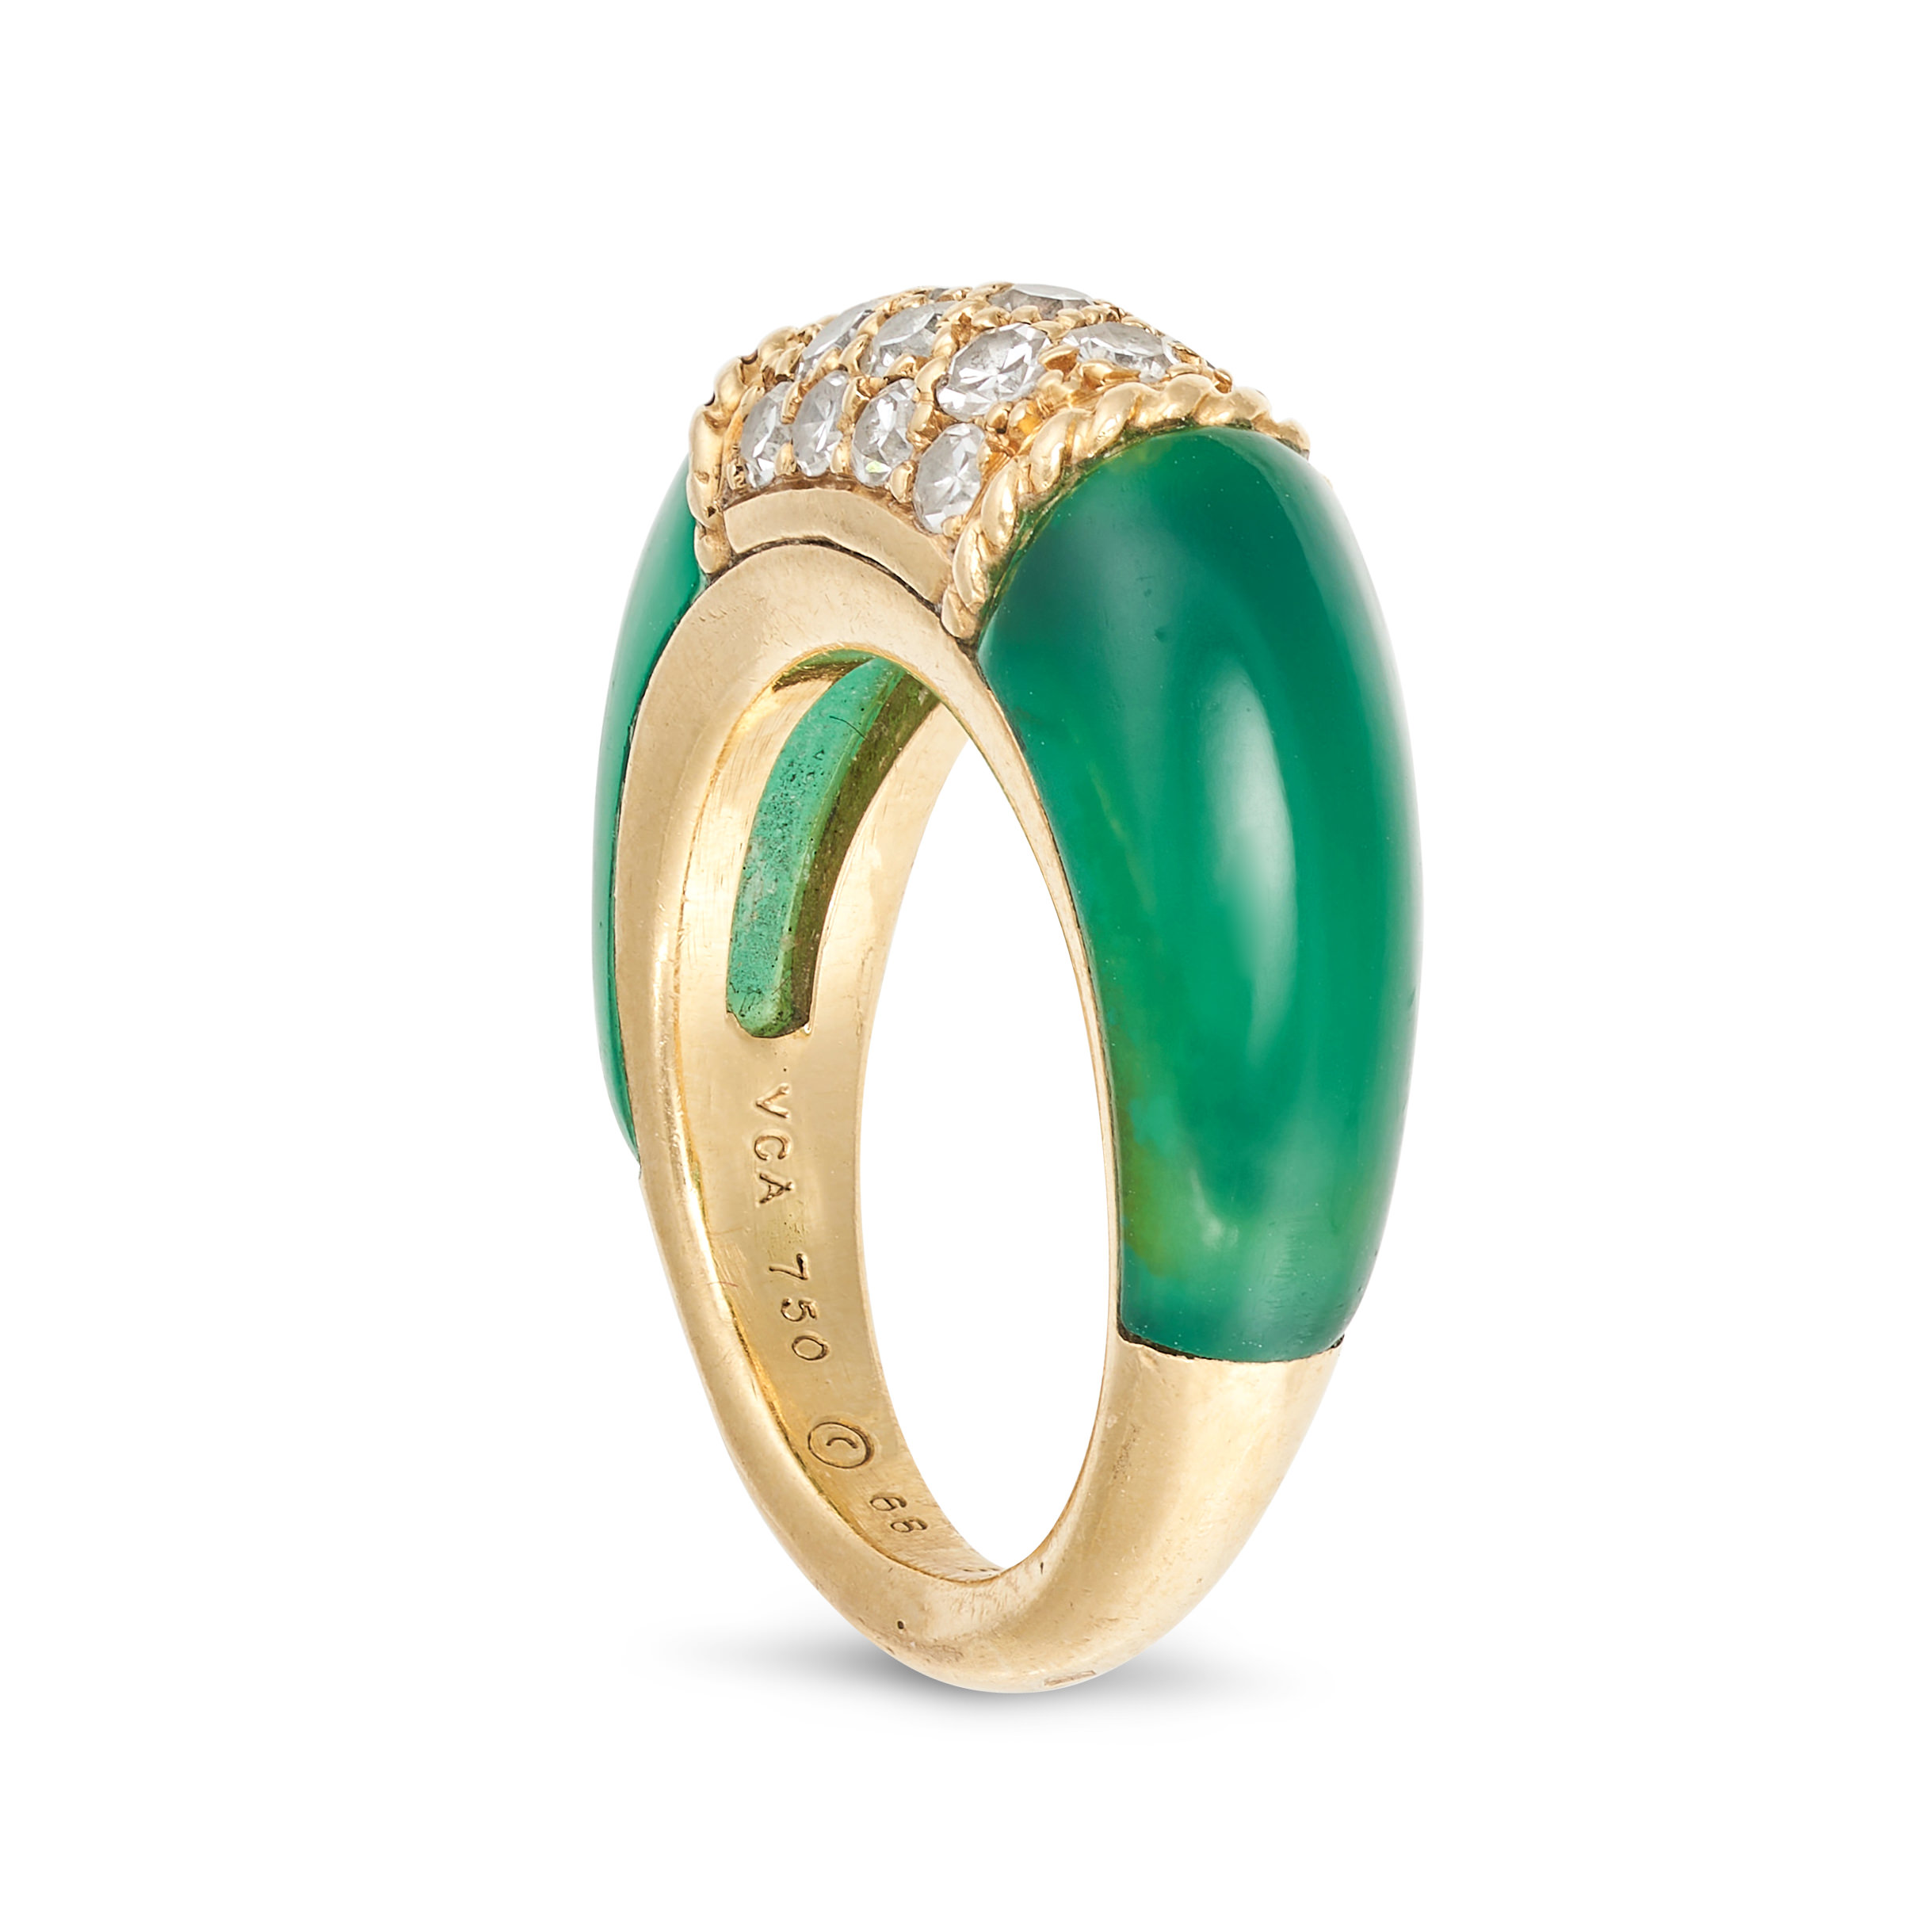 VAN CLEEF AND ARPELS, A VINTAGE CHRYSOPRASE AND DIAMOND PHILIPPINES RING in 18ct yellow gold, set... - Image 2 of 2